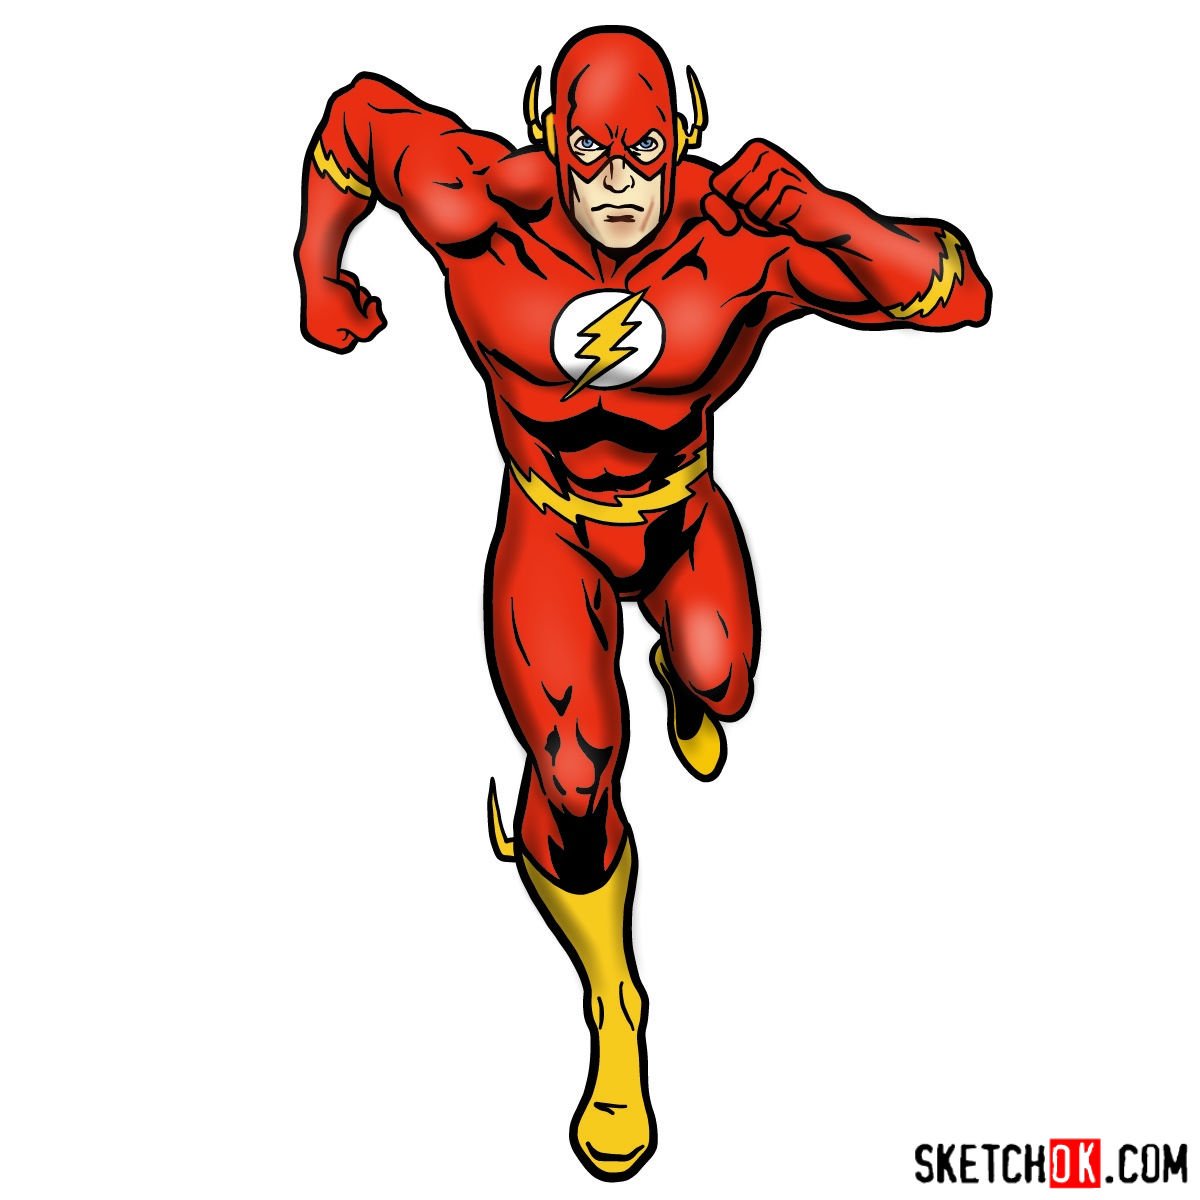 How to draw Flash (Barry Allen) - Sketchok easy drawing guides